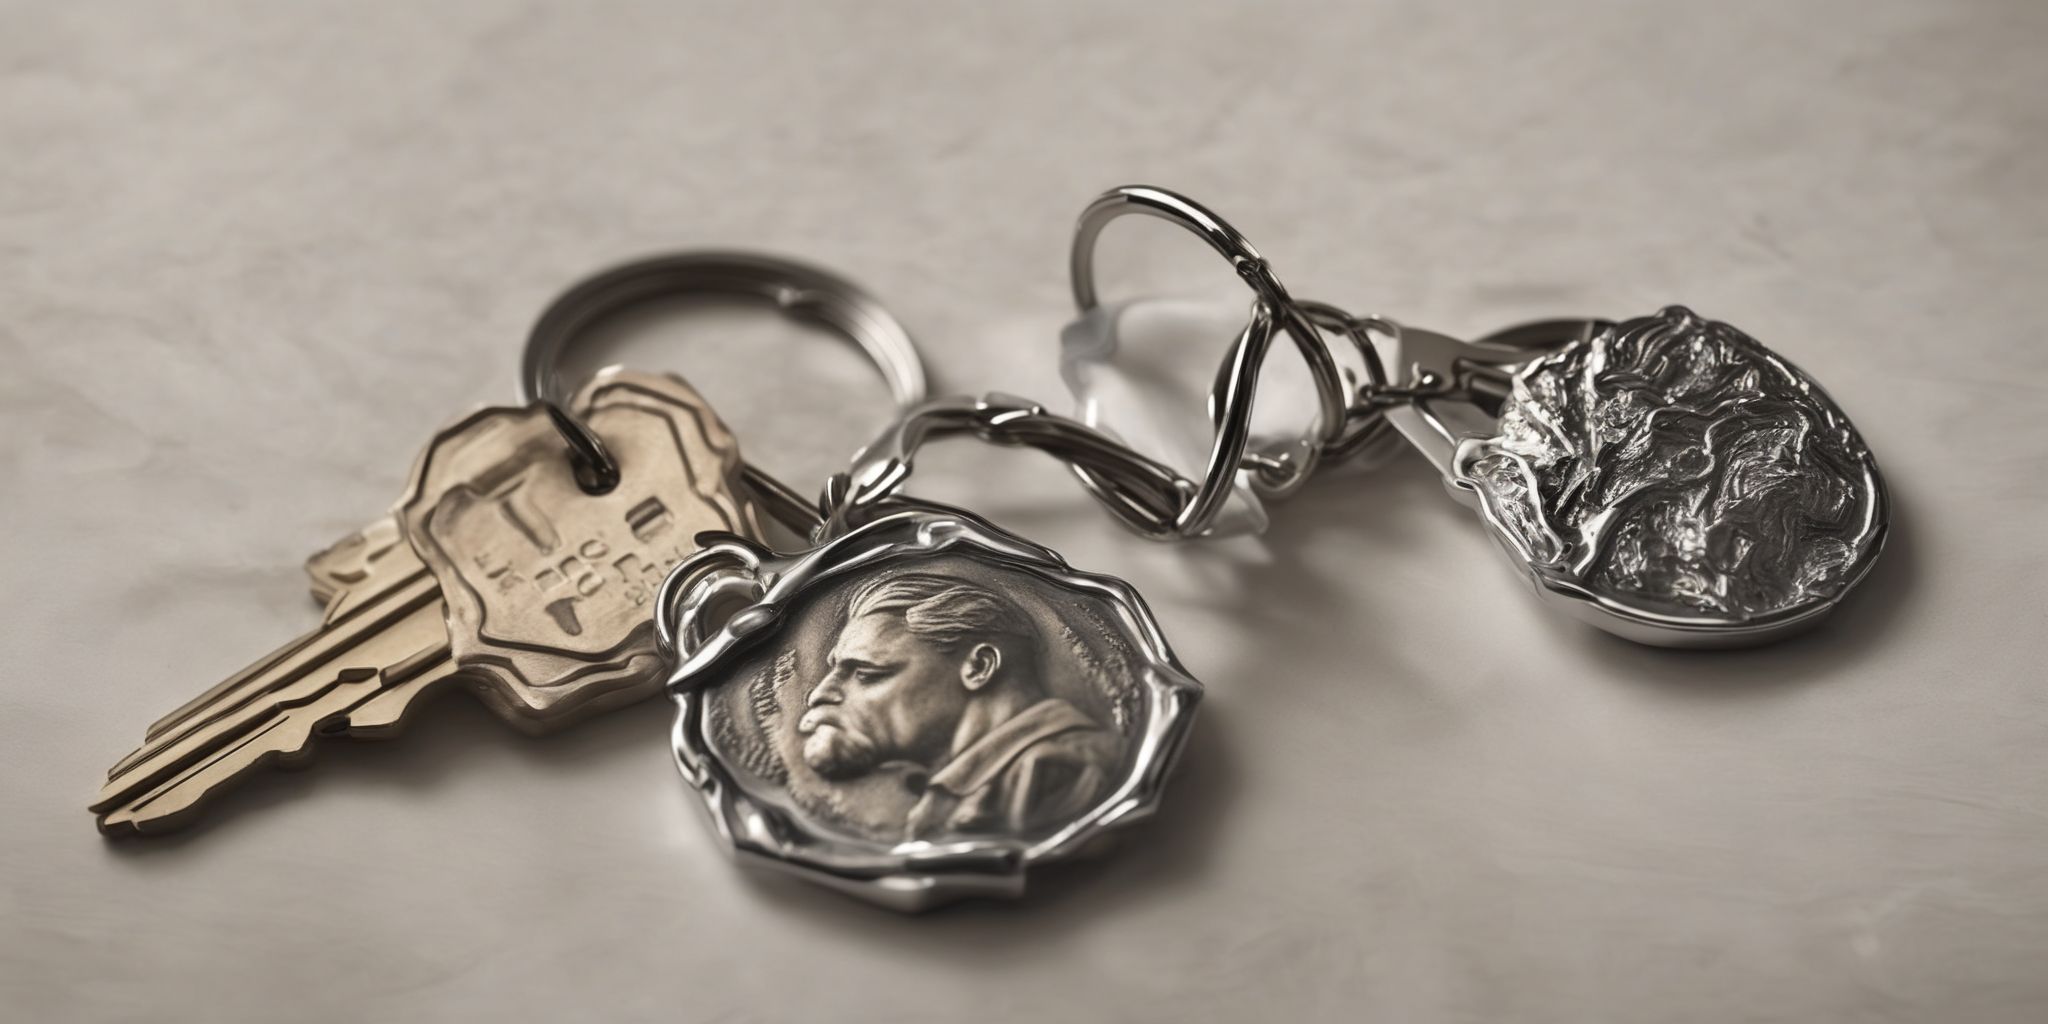 Keychain  in realistic, photographic style